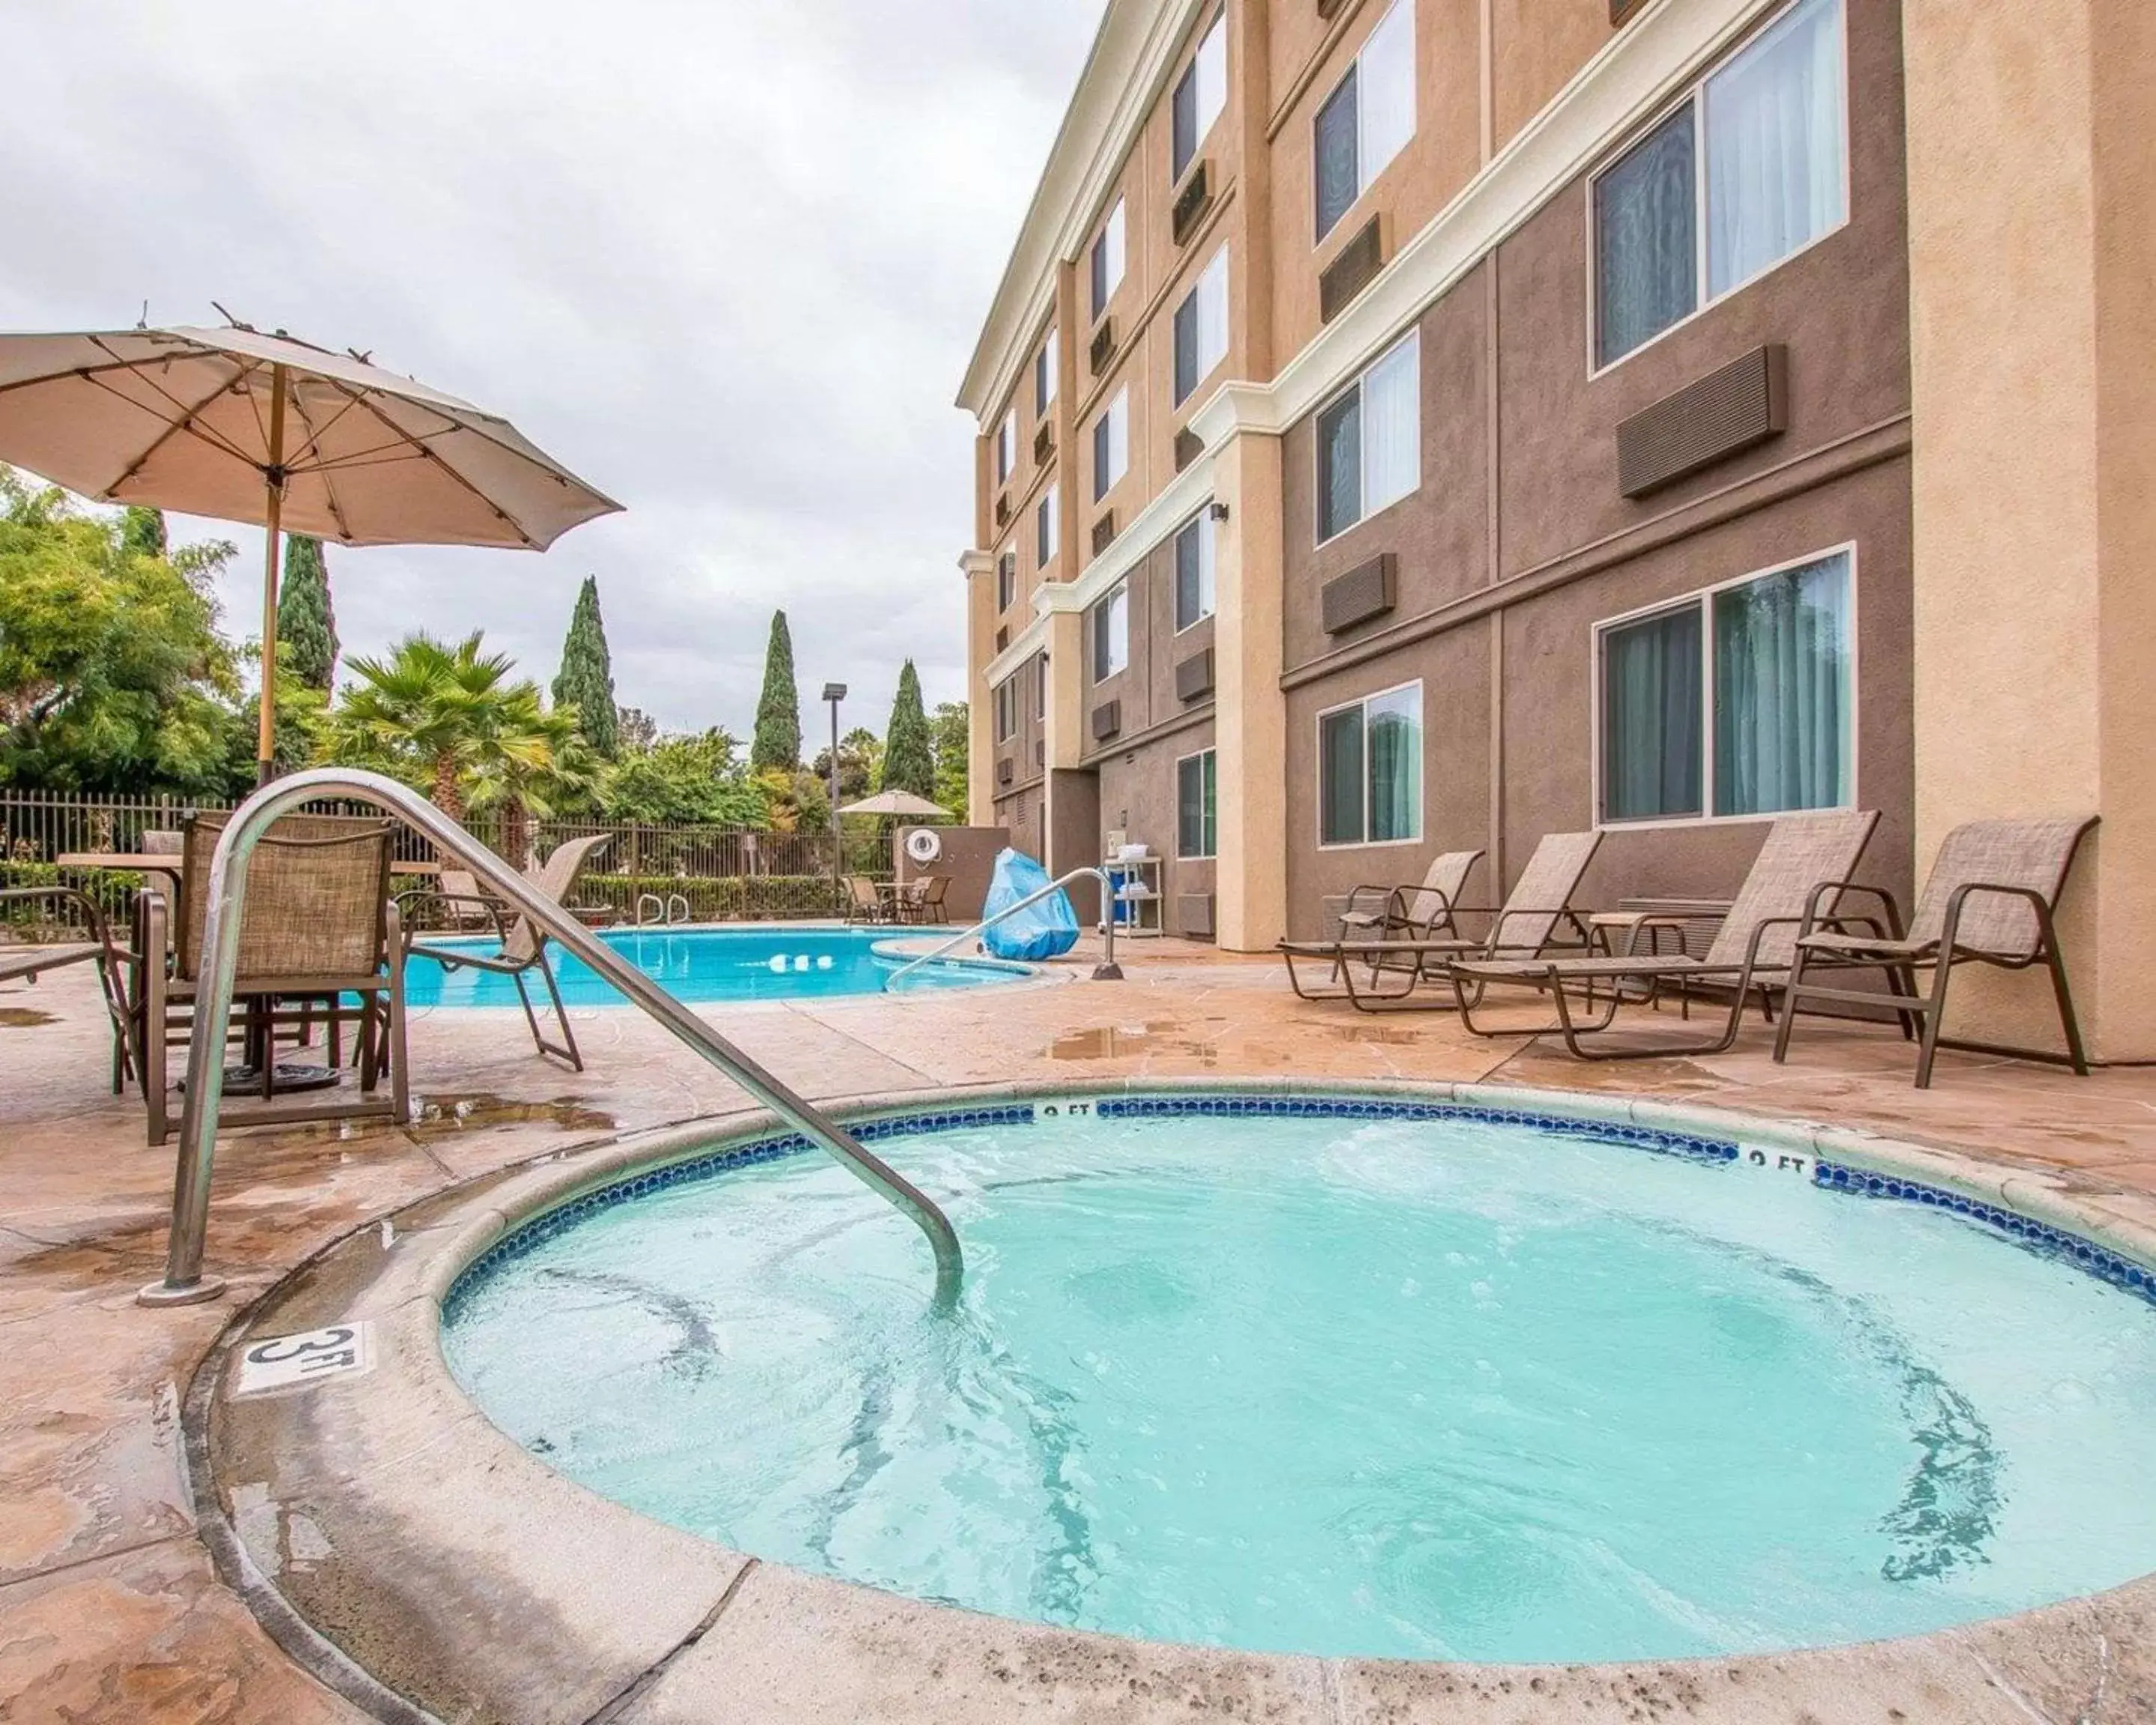 On site, Swimming Pool in Comfort Inn Chula Vista San Diego South